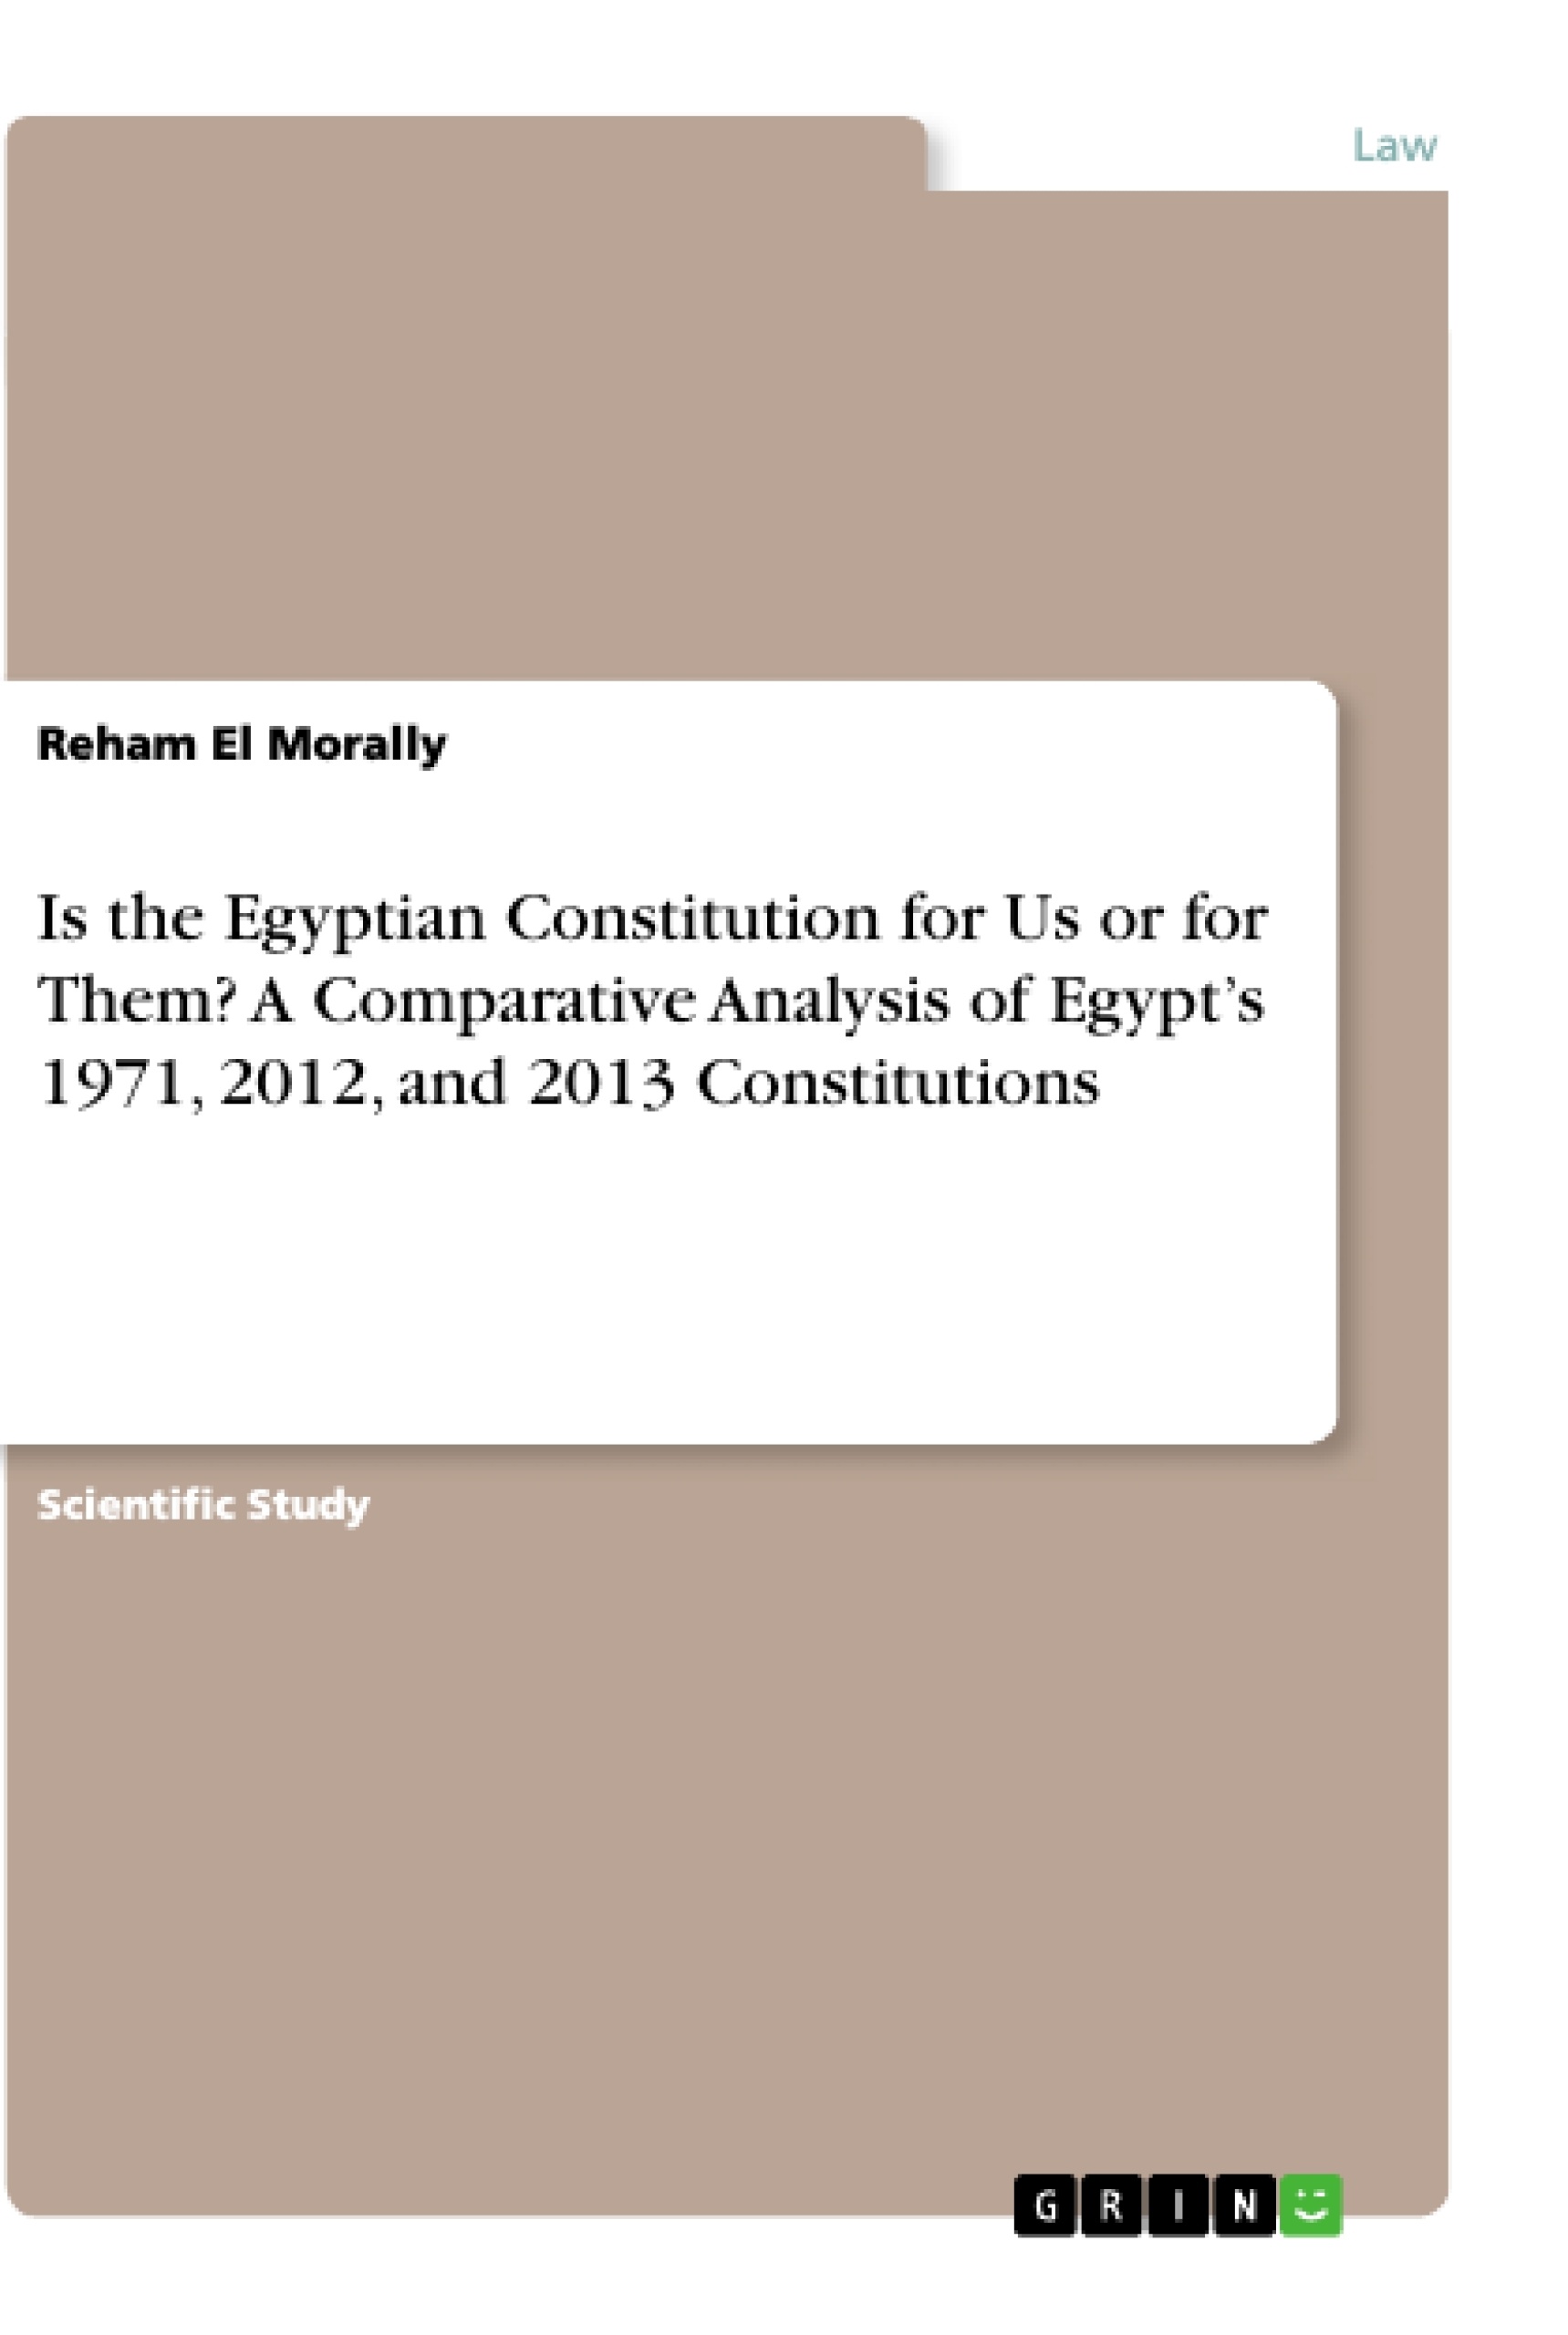 Titre: Is the Egyptian Constitution for Us or for Them? A Comparative Analysis of Egypt’s 1971, 2012, and 2013 Constitutions